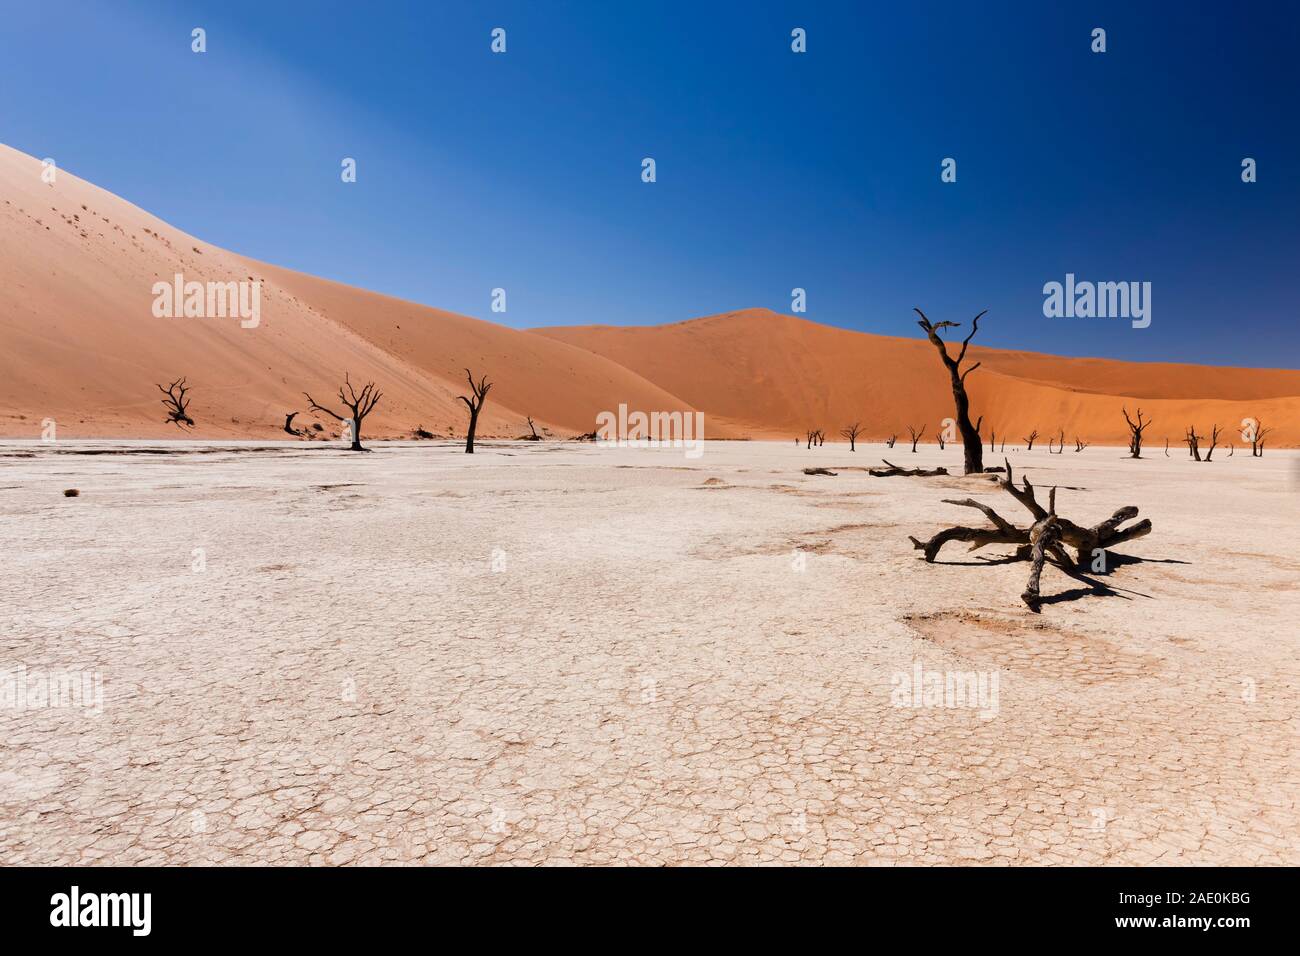 Dead lake, Dried up bed, dead trees, Deadvlei, Namib Desert, Namib-Naukluft National Park, Namibia, Southern Africa, Africa Stock Photo